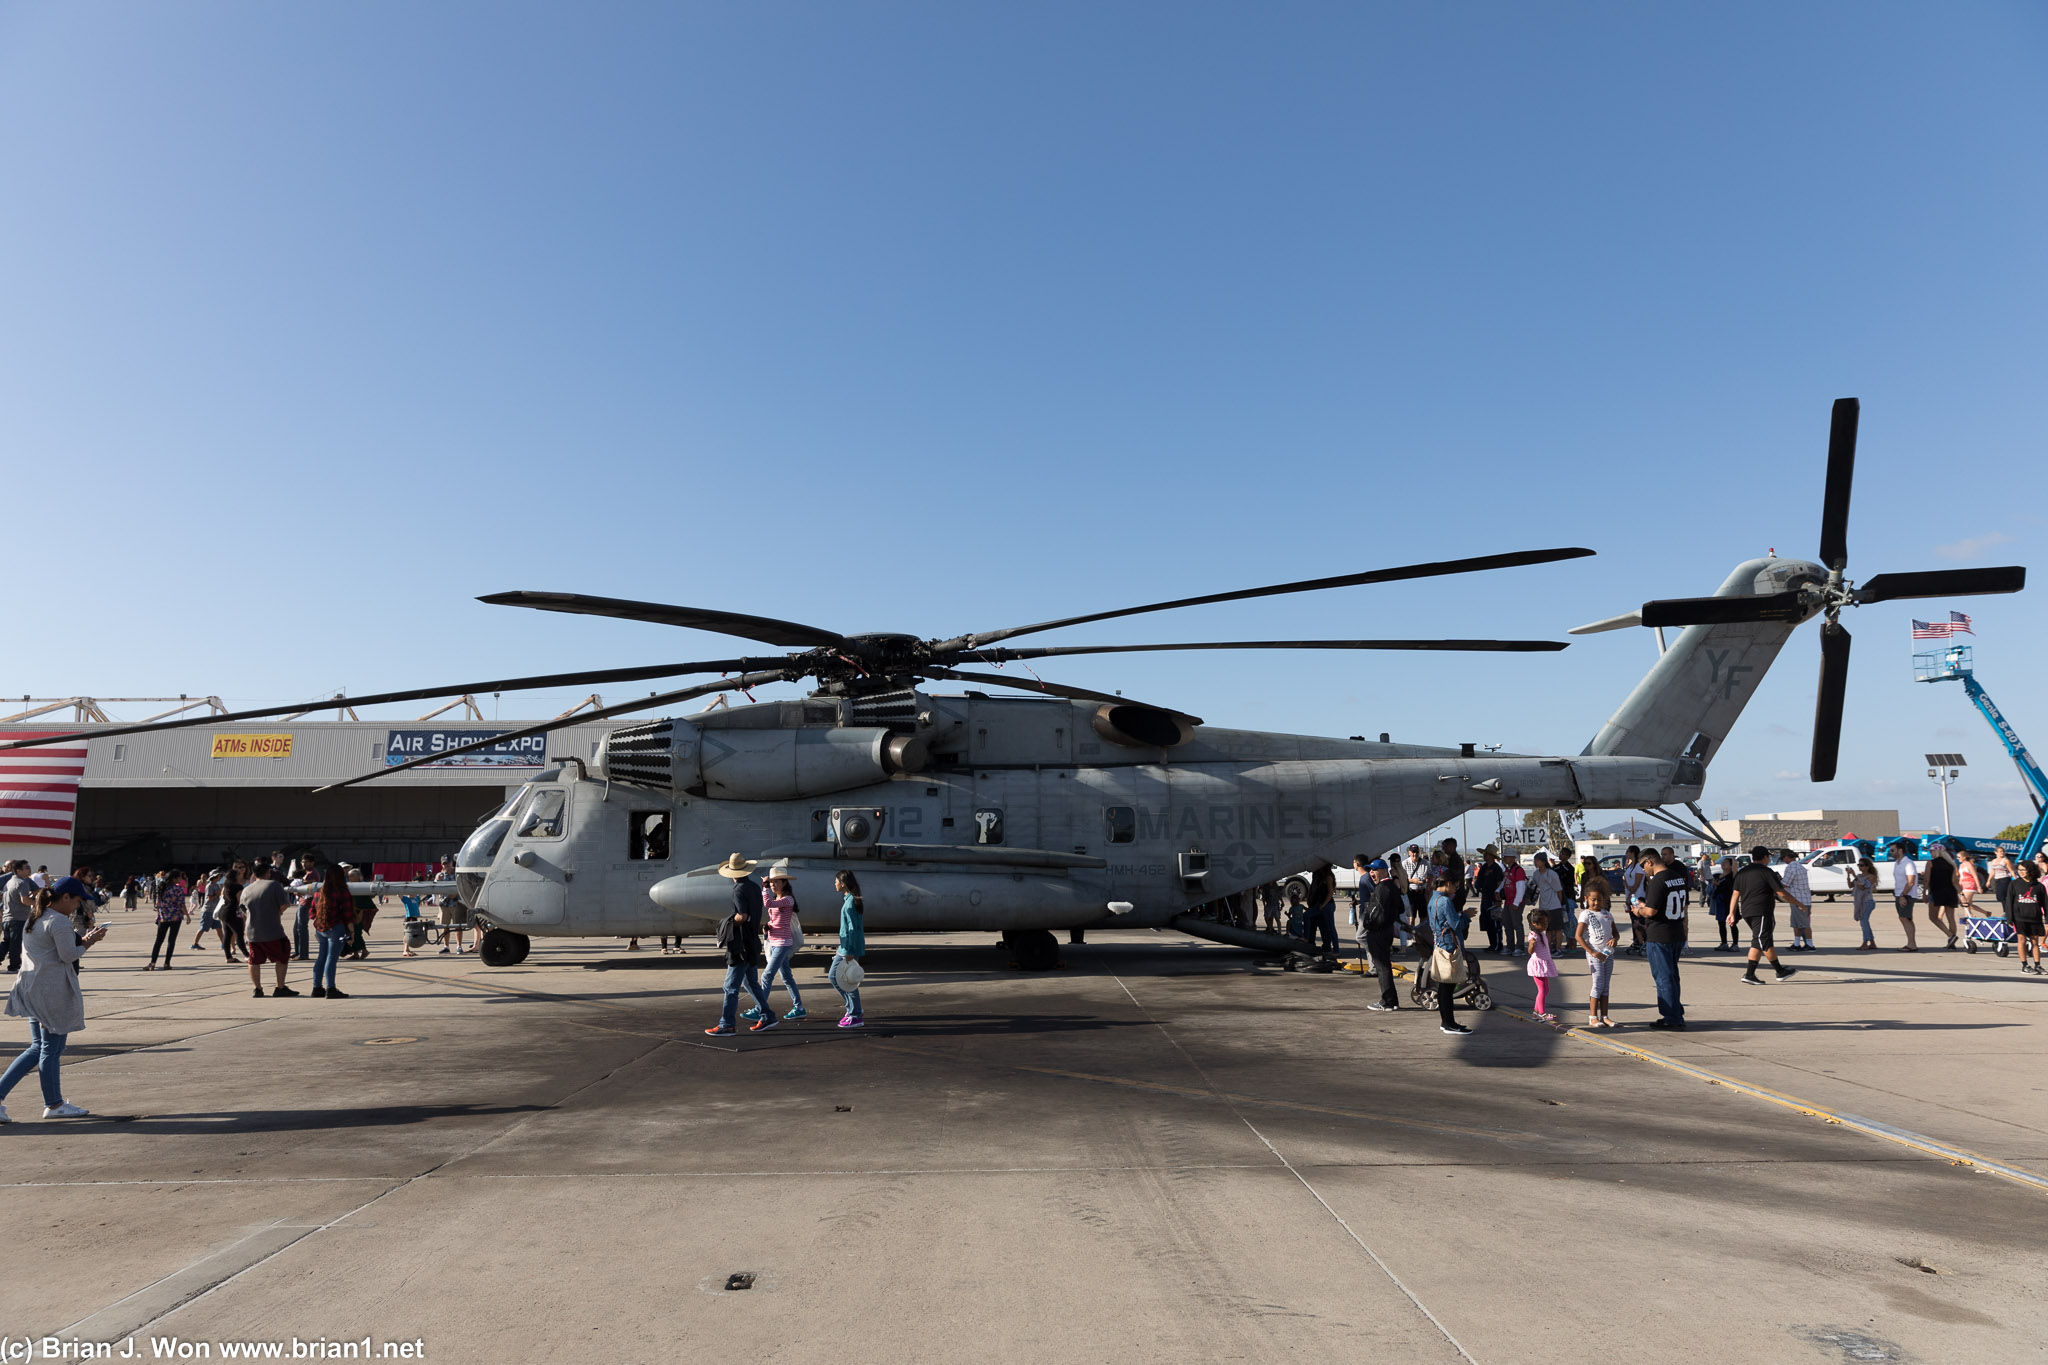 Sikorsky CH-53E Super Stallion. That is a damned big helicopter.